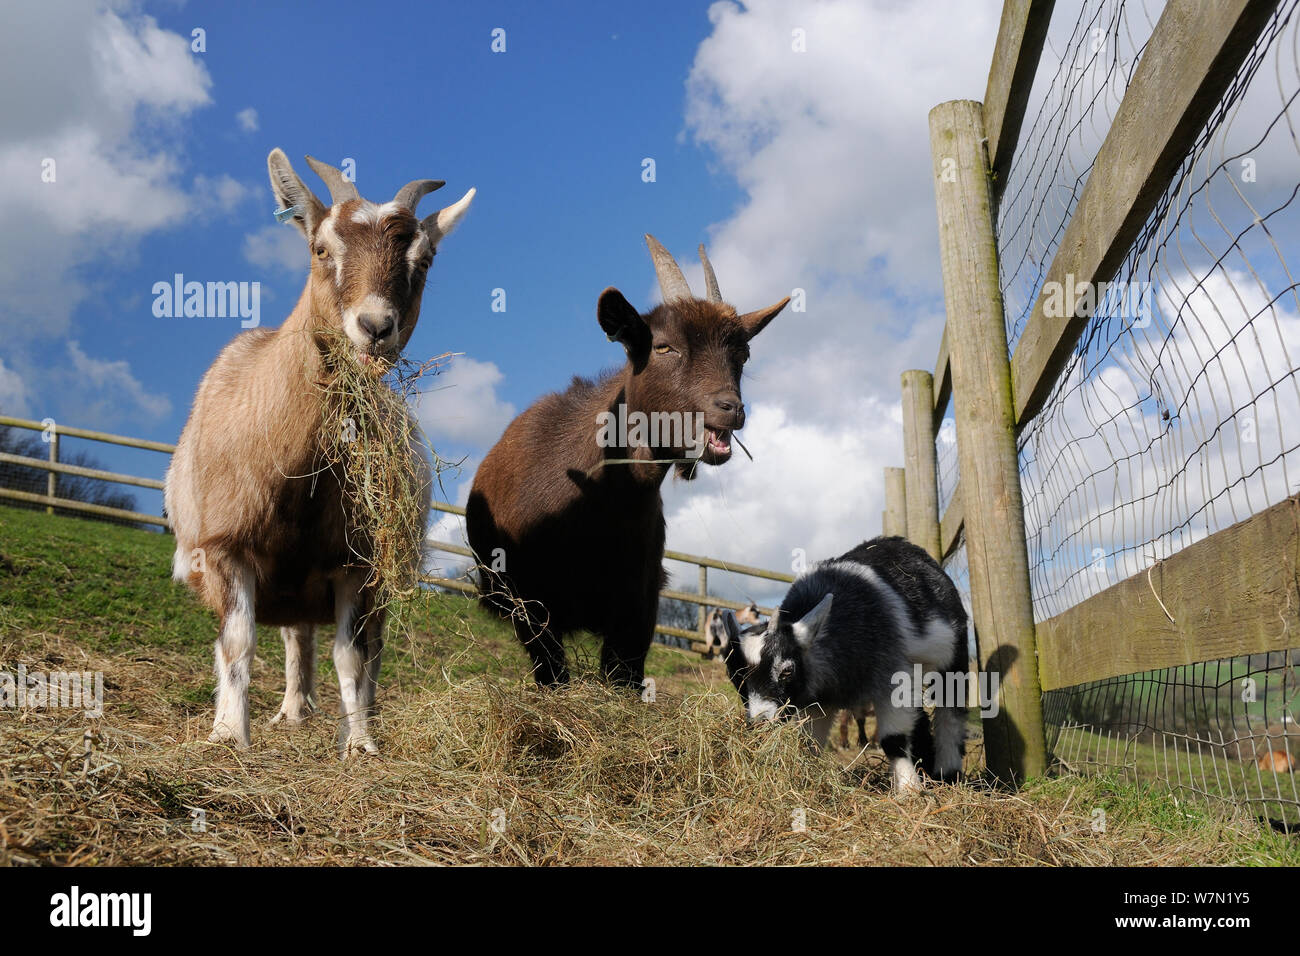 Two adults and a kid Pygmy goat (Capra hircus) grazing hay in a fenced paddock, Wiltshire, UK, March. Stock Photo